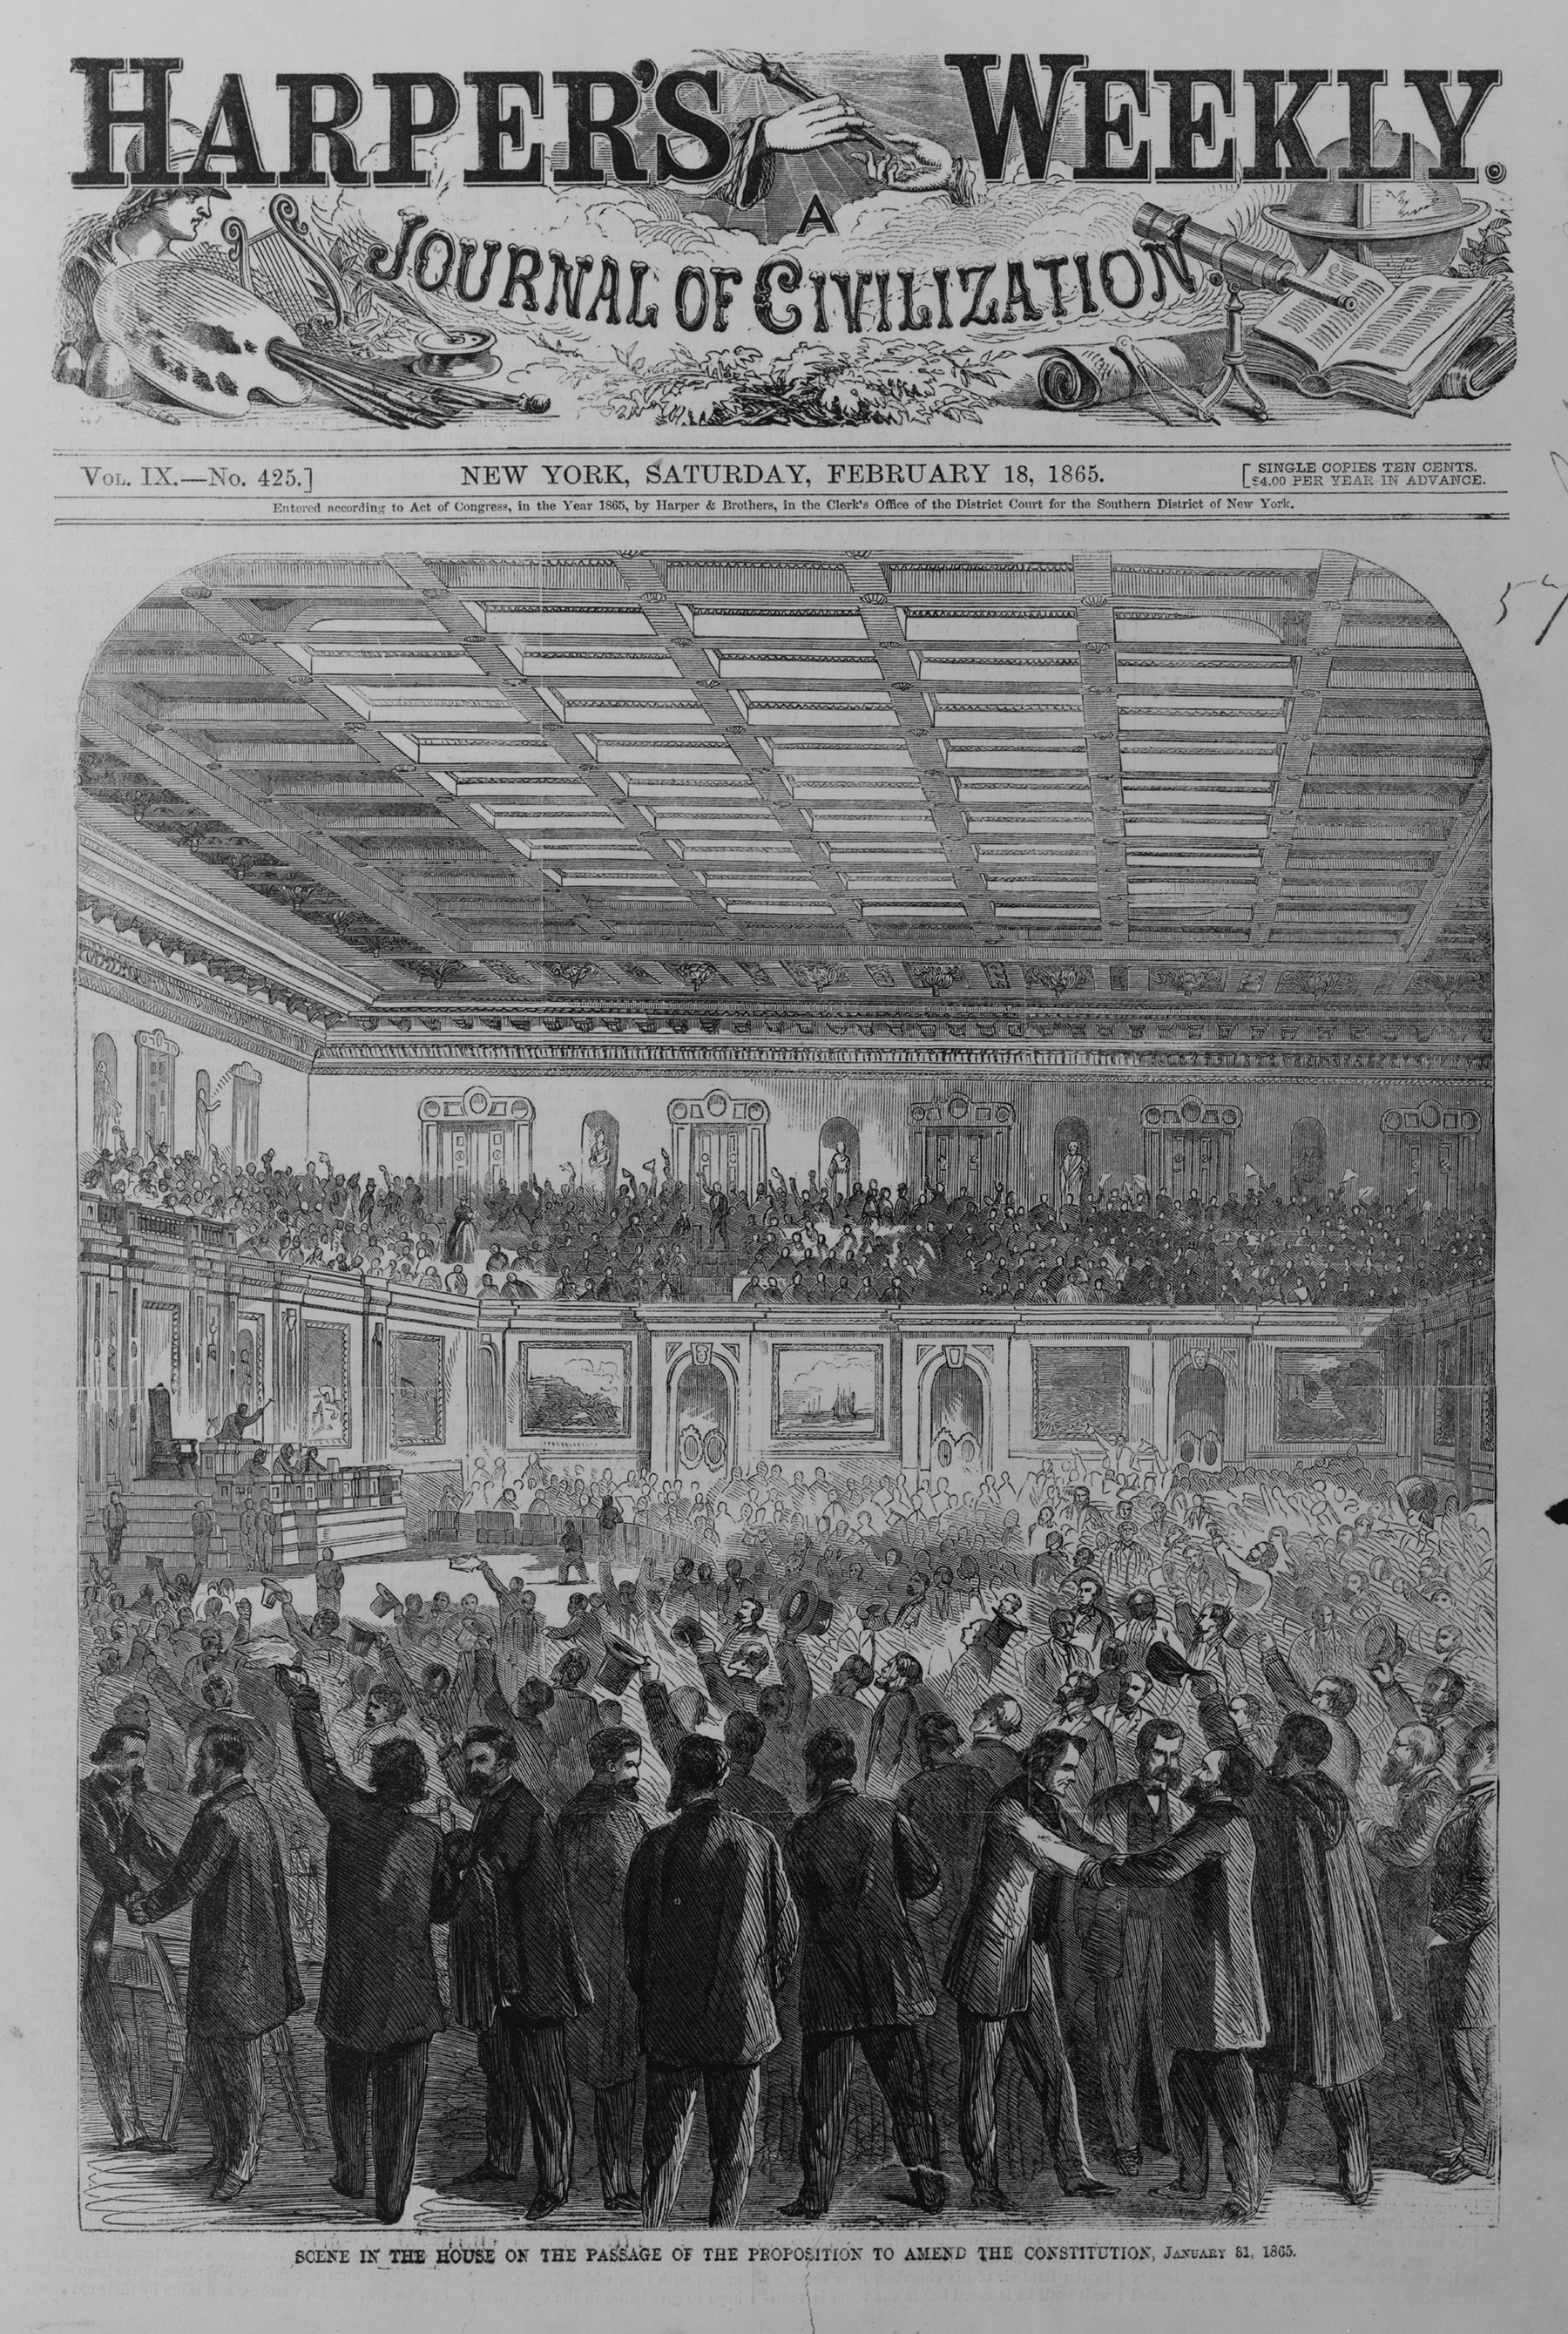 Scene in the House on the passage of the proposition to amend the Constitution, January 31, 1865